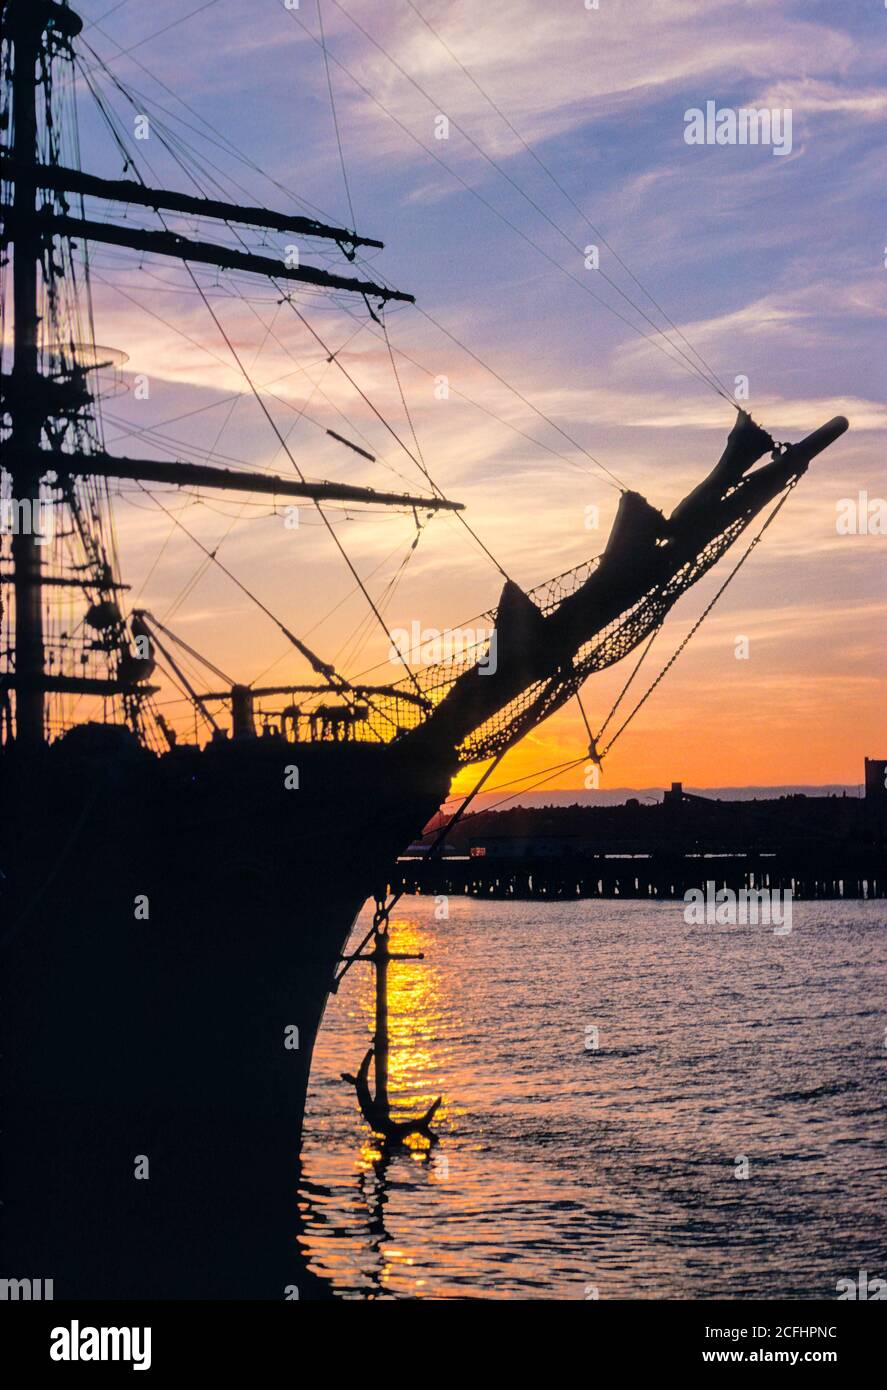 Nippon Maru, Japanese Naval Training Ship, Seattle, Washington USA, four masted barque moored at Pier 70 on Seattle waterfront at sunset. Stock Photo